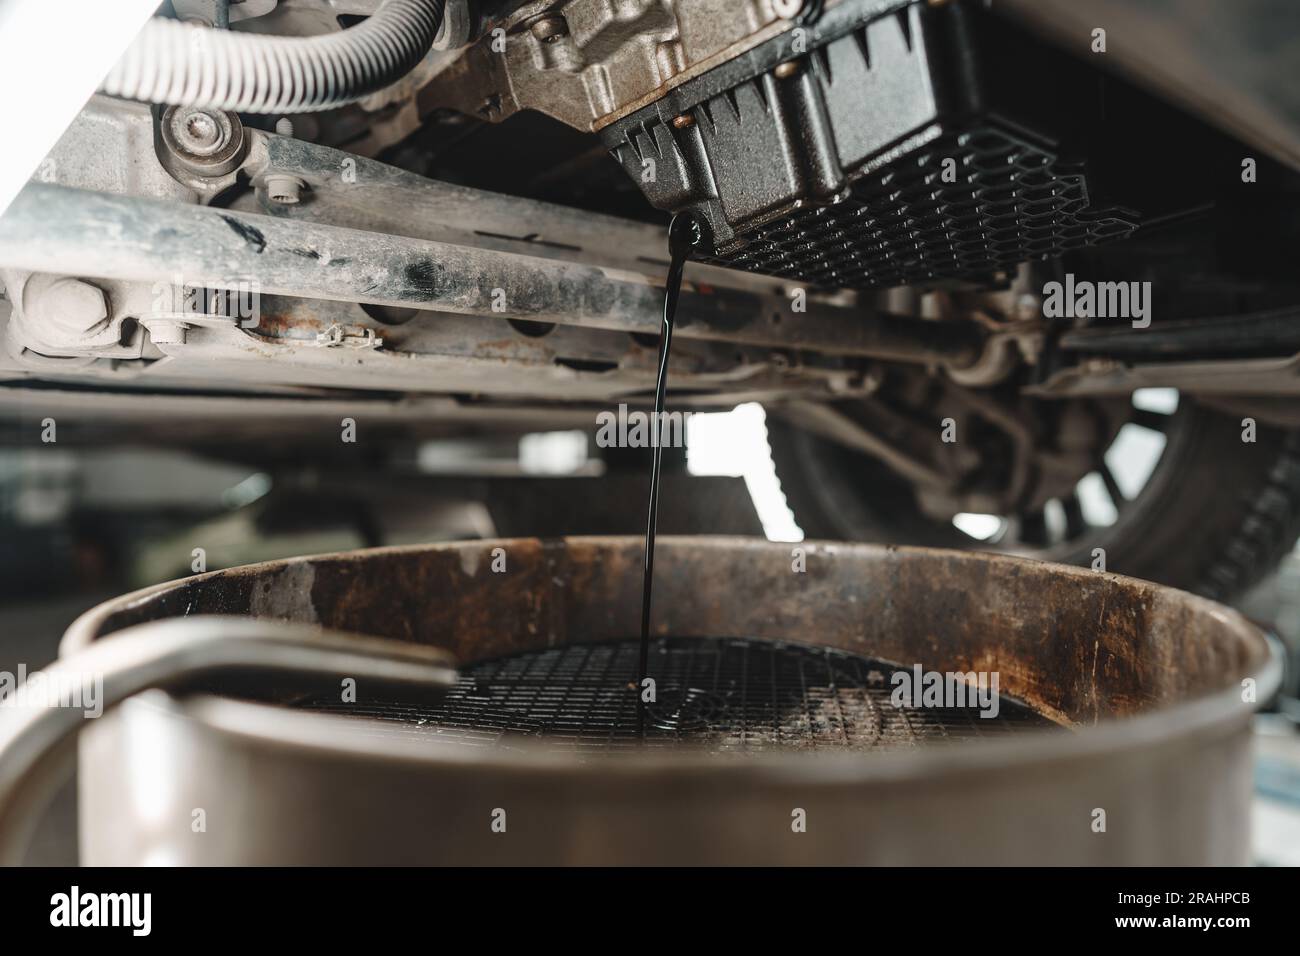 Process of oil change in a car service Stock Photo